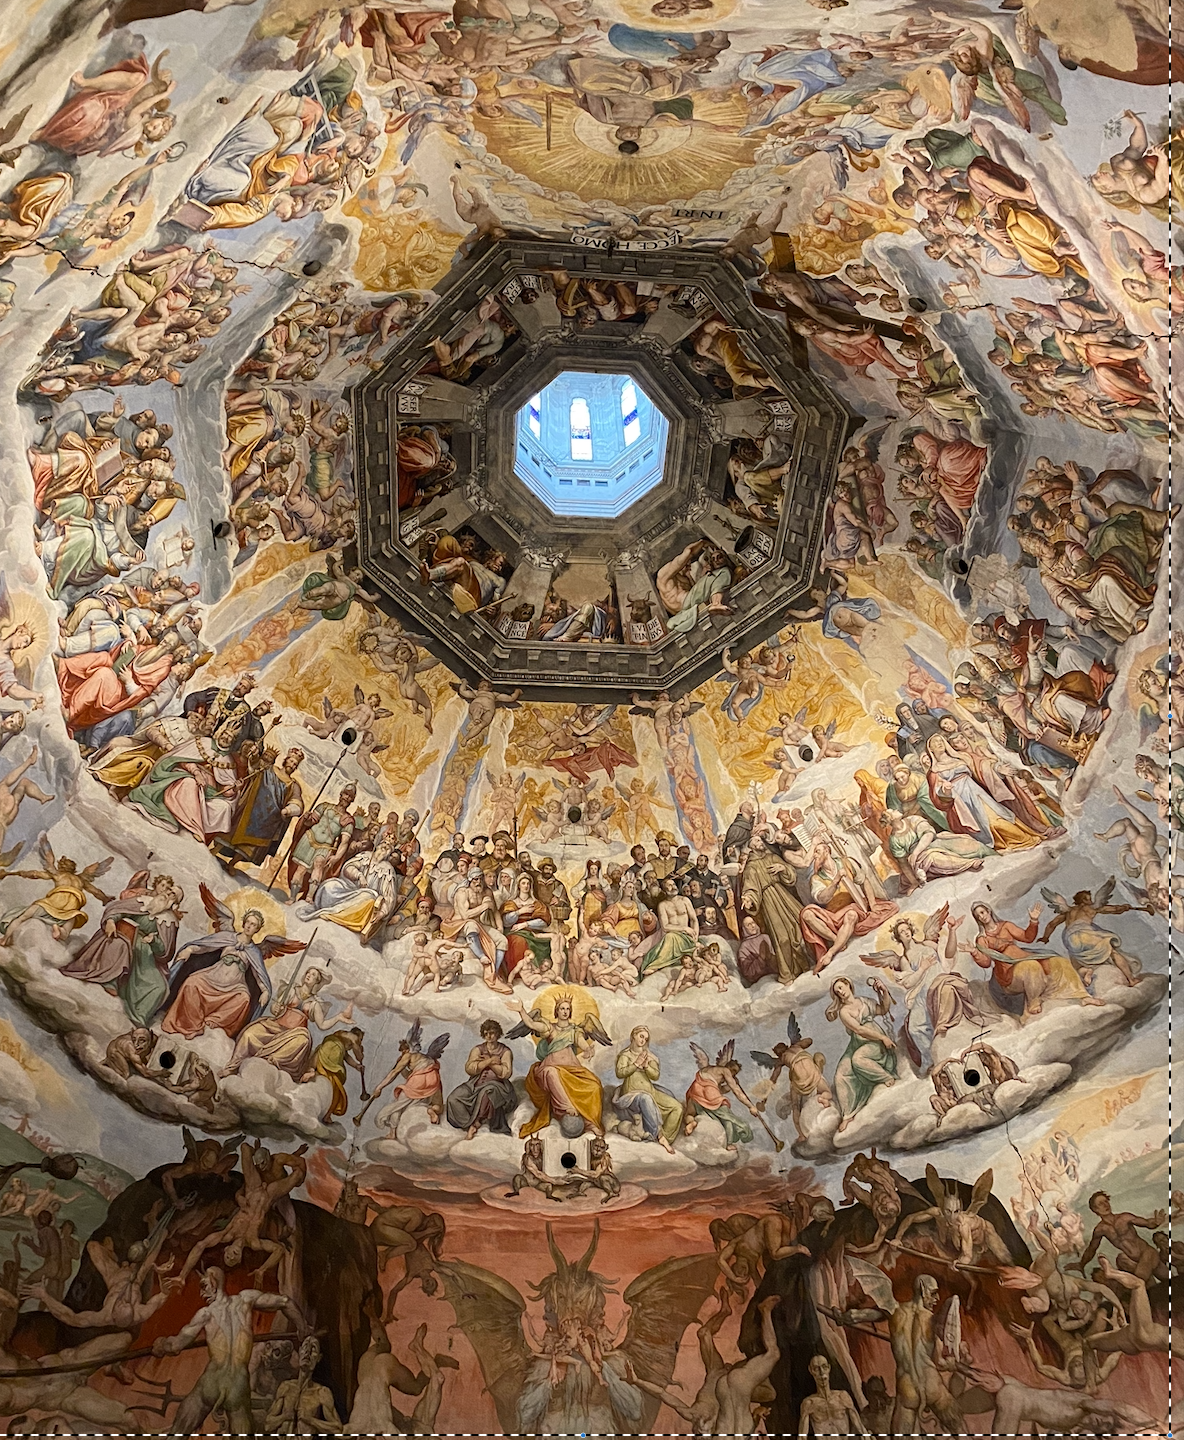 The inside of the Dome of the Florence Cathedral is frescoed by Giorgio Vasari and Federico Zuccario, depicting the Last Judgement of Christ. 